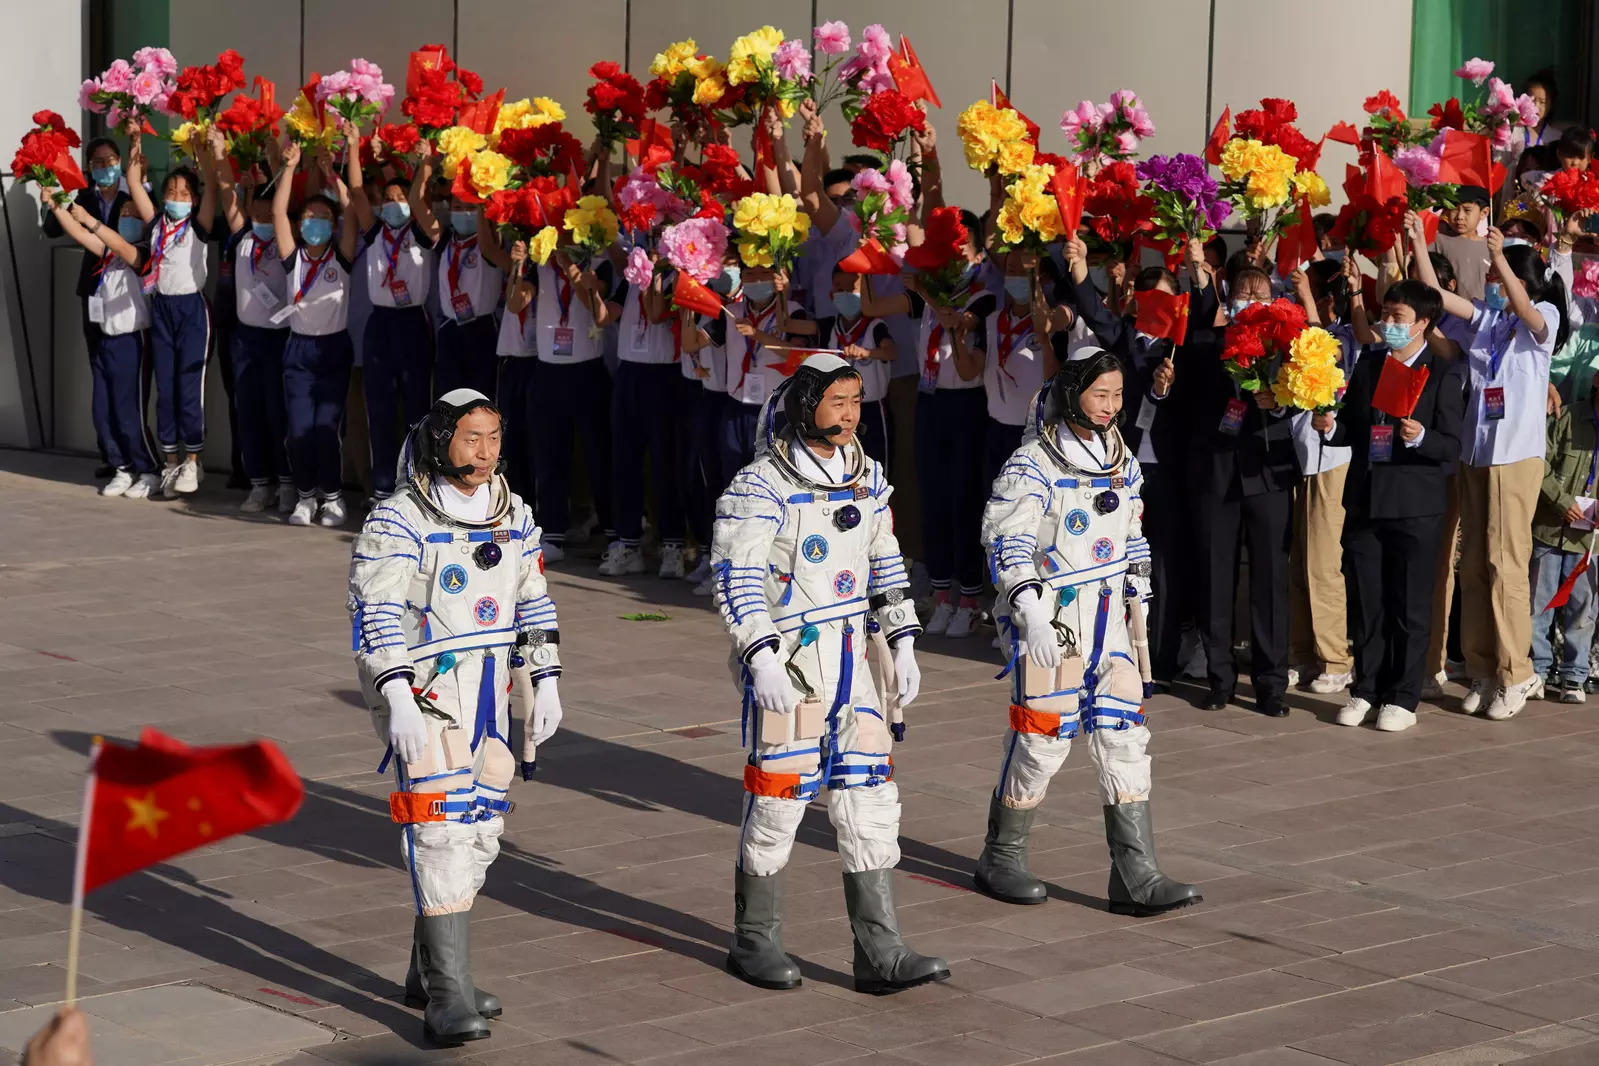 Chinese astronauts Chen Dong, Liu Yang and Cai Xuzhe attend a see-off ceremony before the launch of the Long March-2F carrier rocket, carrying the Shenzhou-14 spacecraft for a crewed mission to build China's space station, at Jiuquan Satellite Launch Center near Jiuquan, Gansu province 